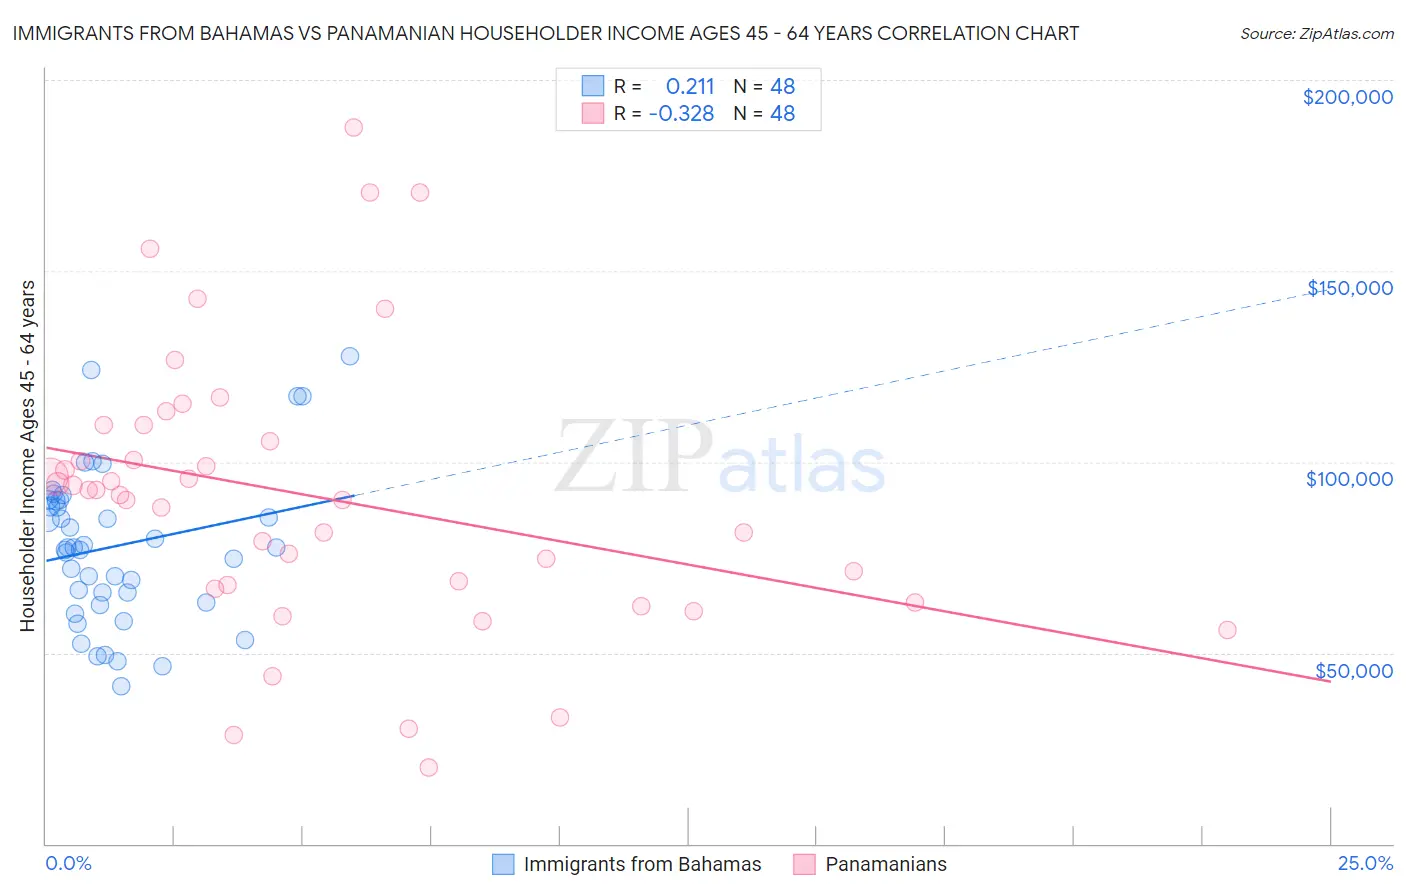 Immigrants from Bahamas vs Panamanian Householder Income Ages 45 - 64 years